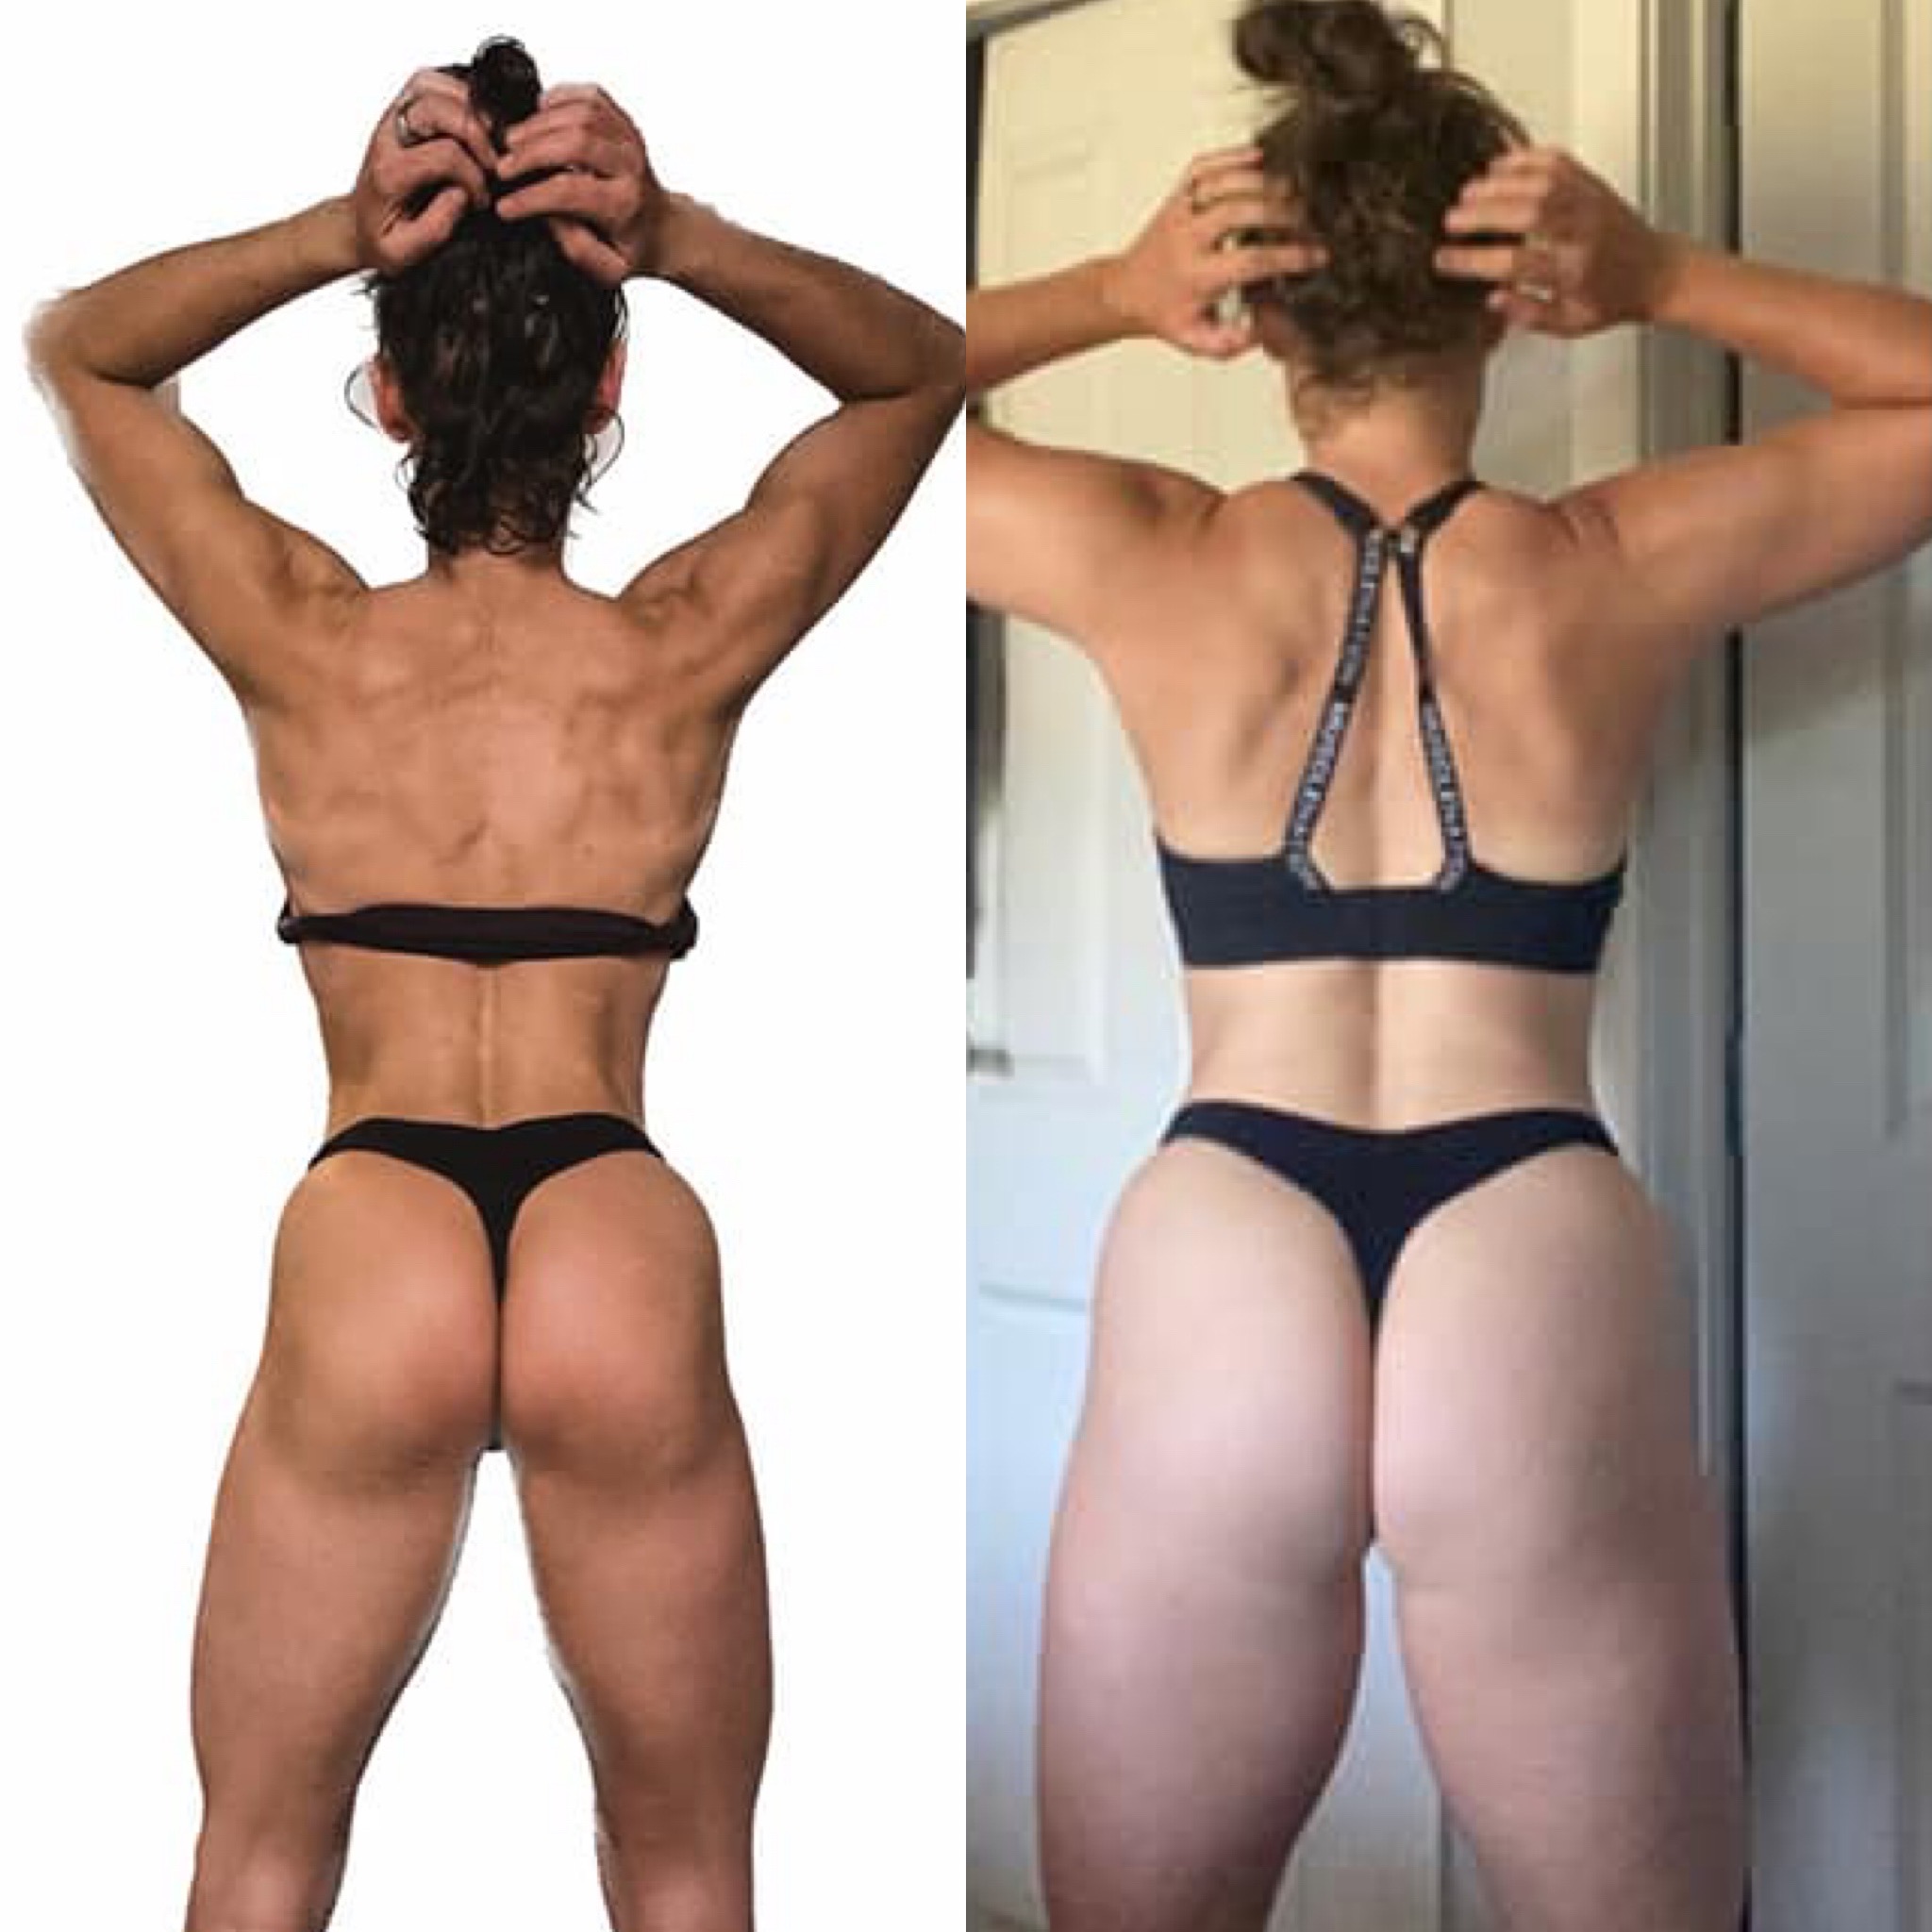 I'd been following Sharelle Grant on Instagram for quite some time and finally made the switch, she seemed so real, and genuine and I loved that her posts were encouraging and uplifting. Her style of training was exactly what I'd been looking for! A year later, my strength has gone way up, and so has my muscle mass and confidence! My tennis elbow is gone and back pain lessened. And I have more time outside of the gym for life. It's the gift that keeps on giving!